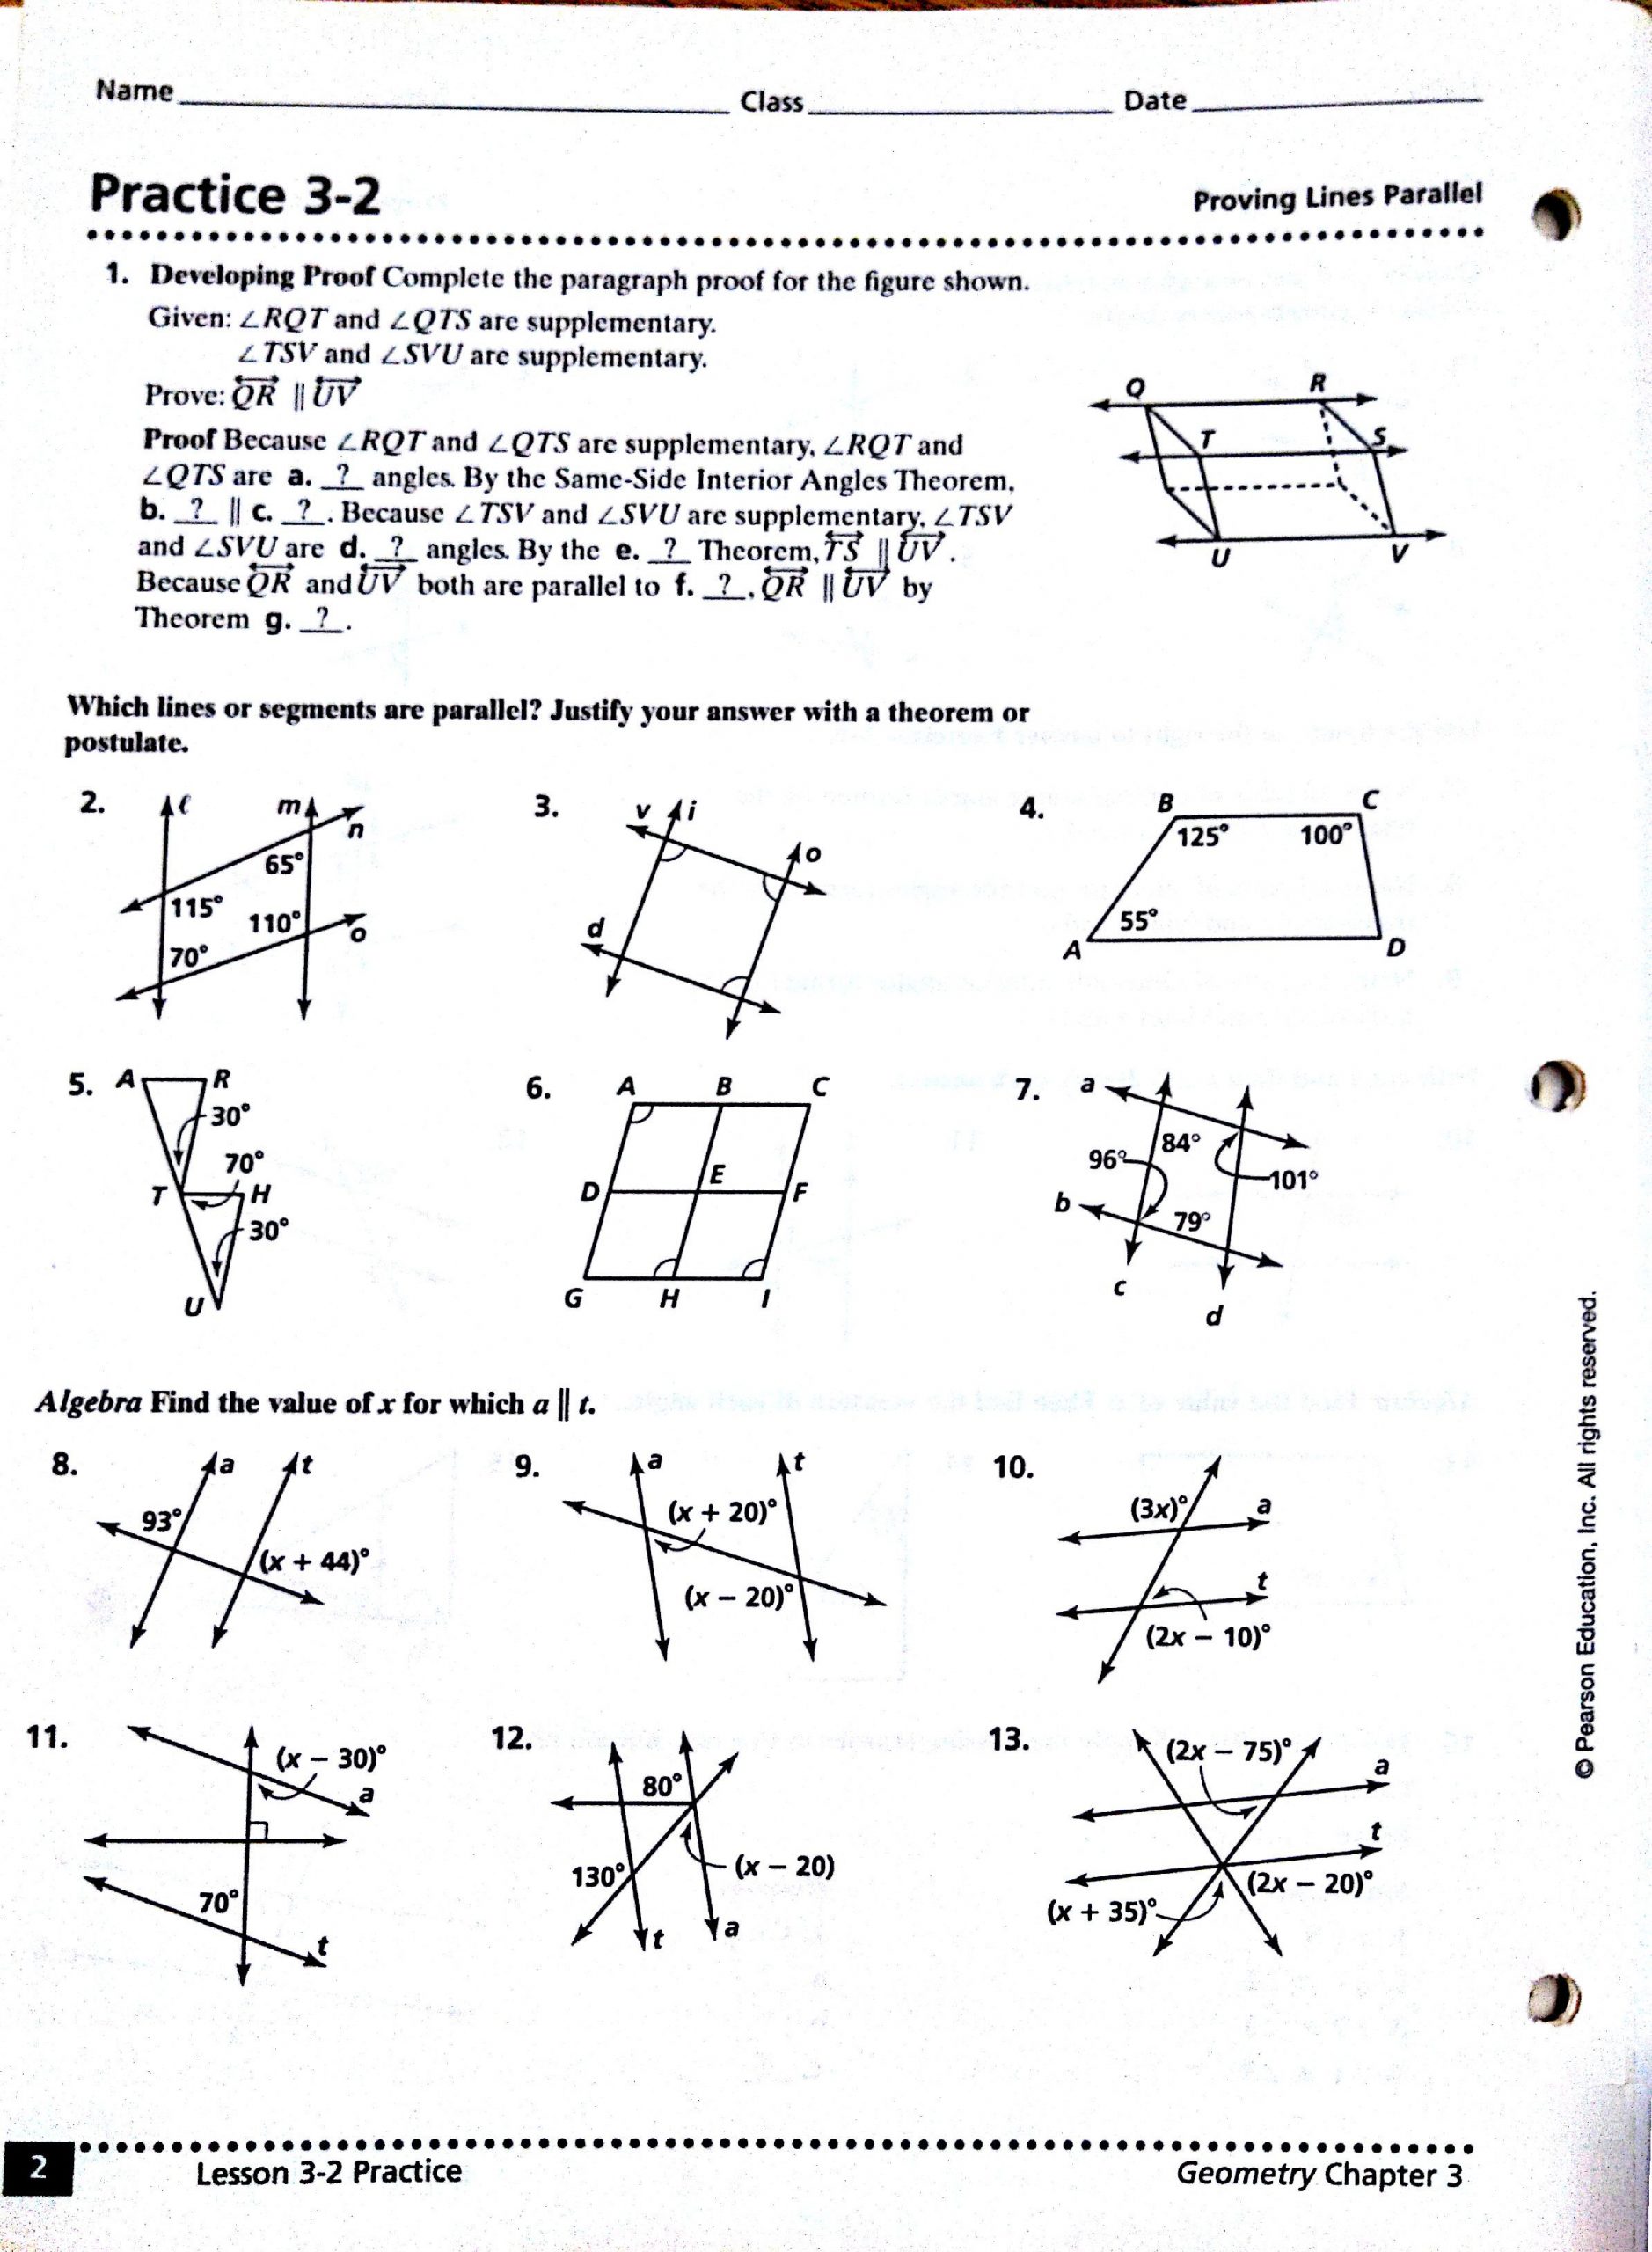 Proving Lines Parallel Worksheet Parallel Lines and Angles Worksheet Answers